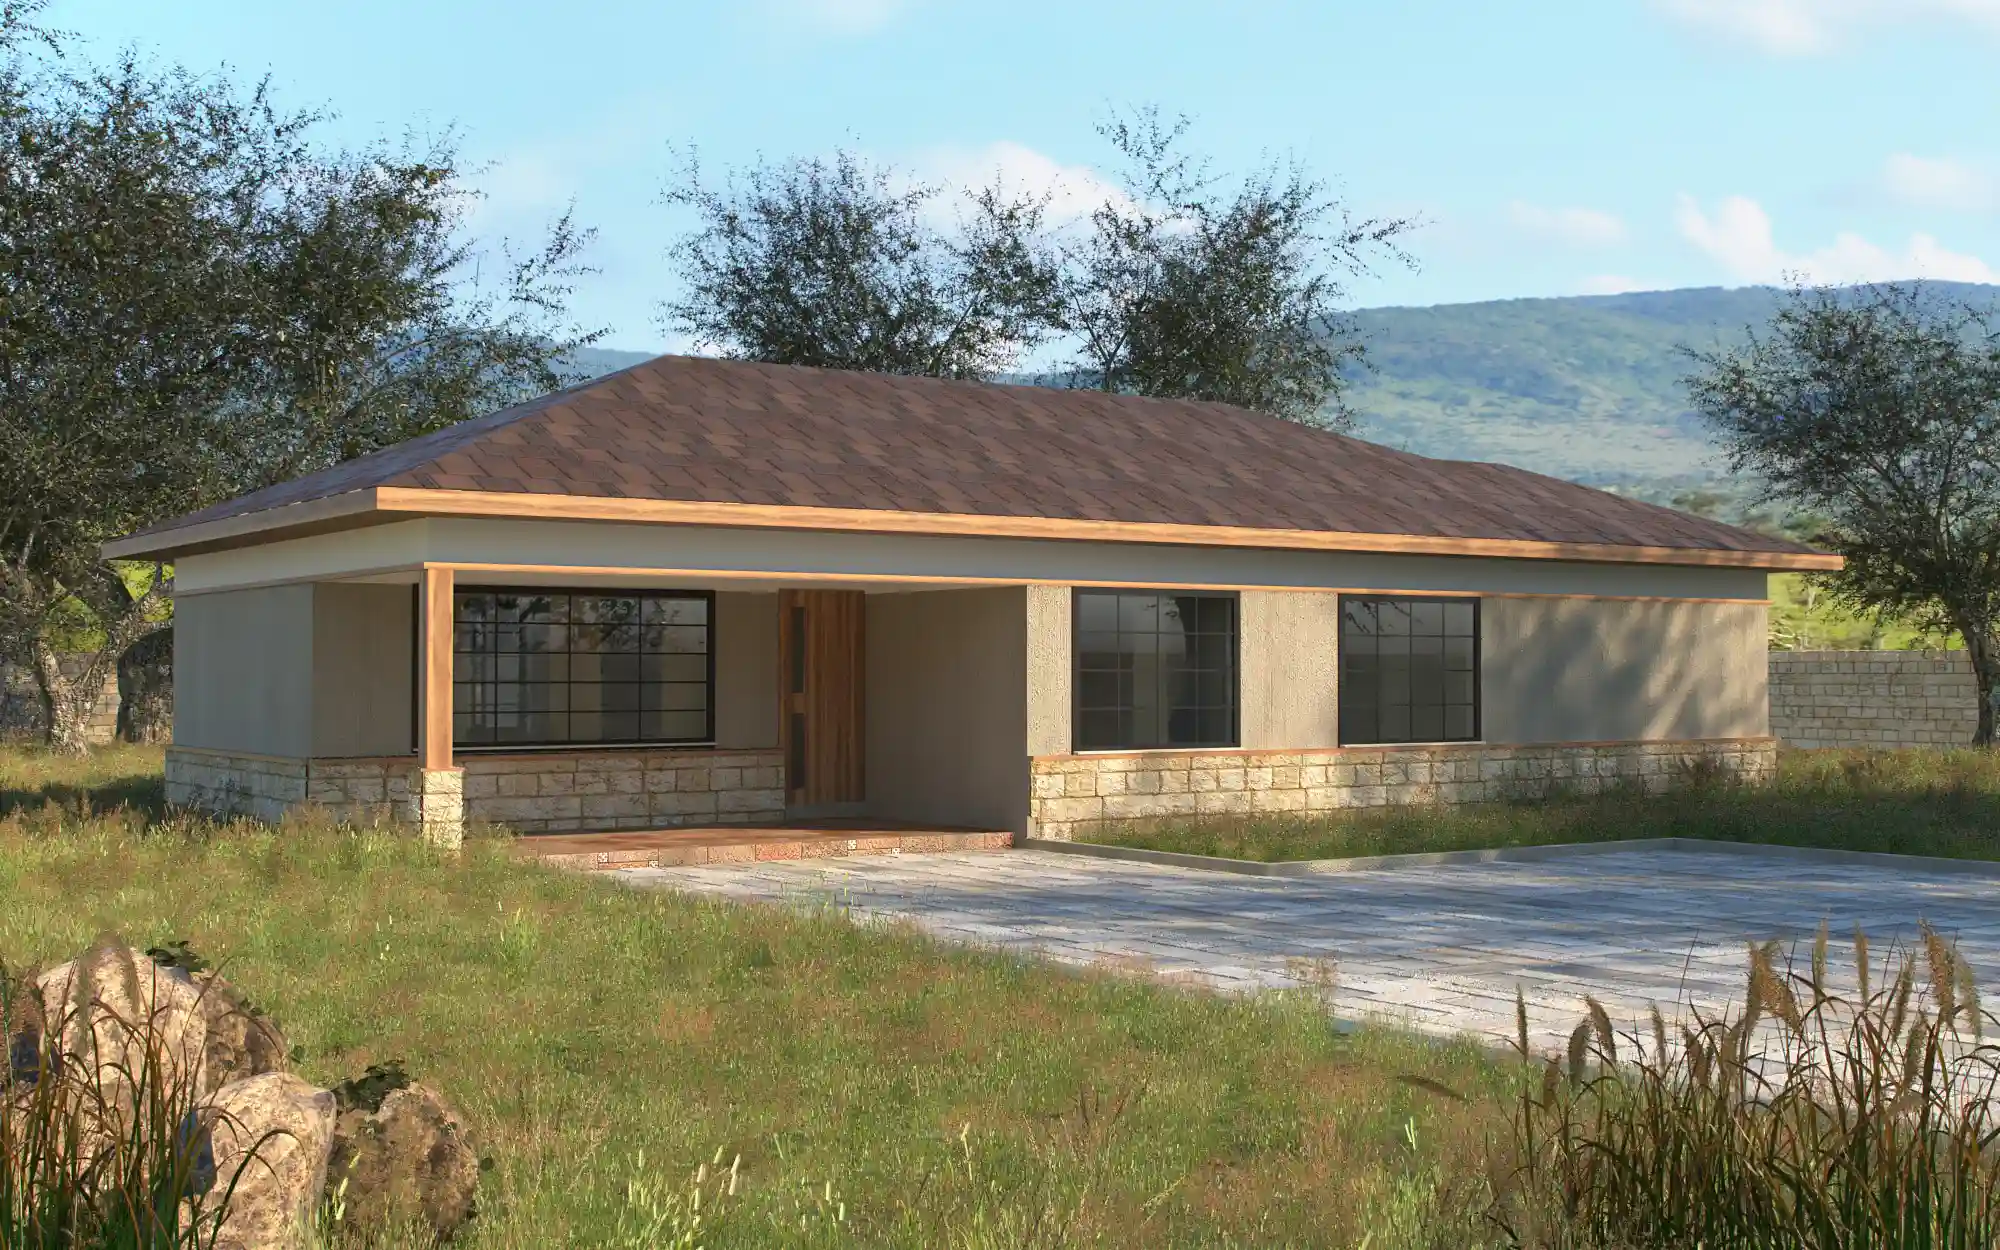 4 Bedroom Bungalow -ID 4121 - 4 BED BNGL TP2 OP1 FRONT.jpg from Inuua Tujenge house plans with 4 bedrooms and 2 bathrooms. ( bungalow )